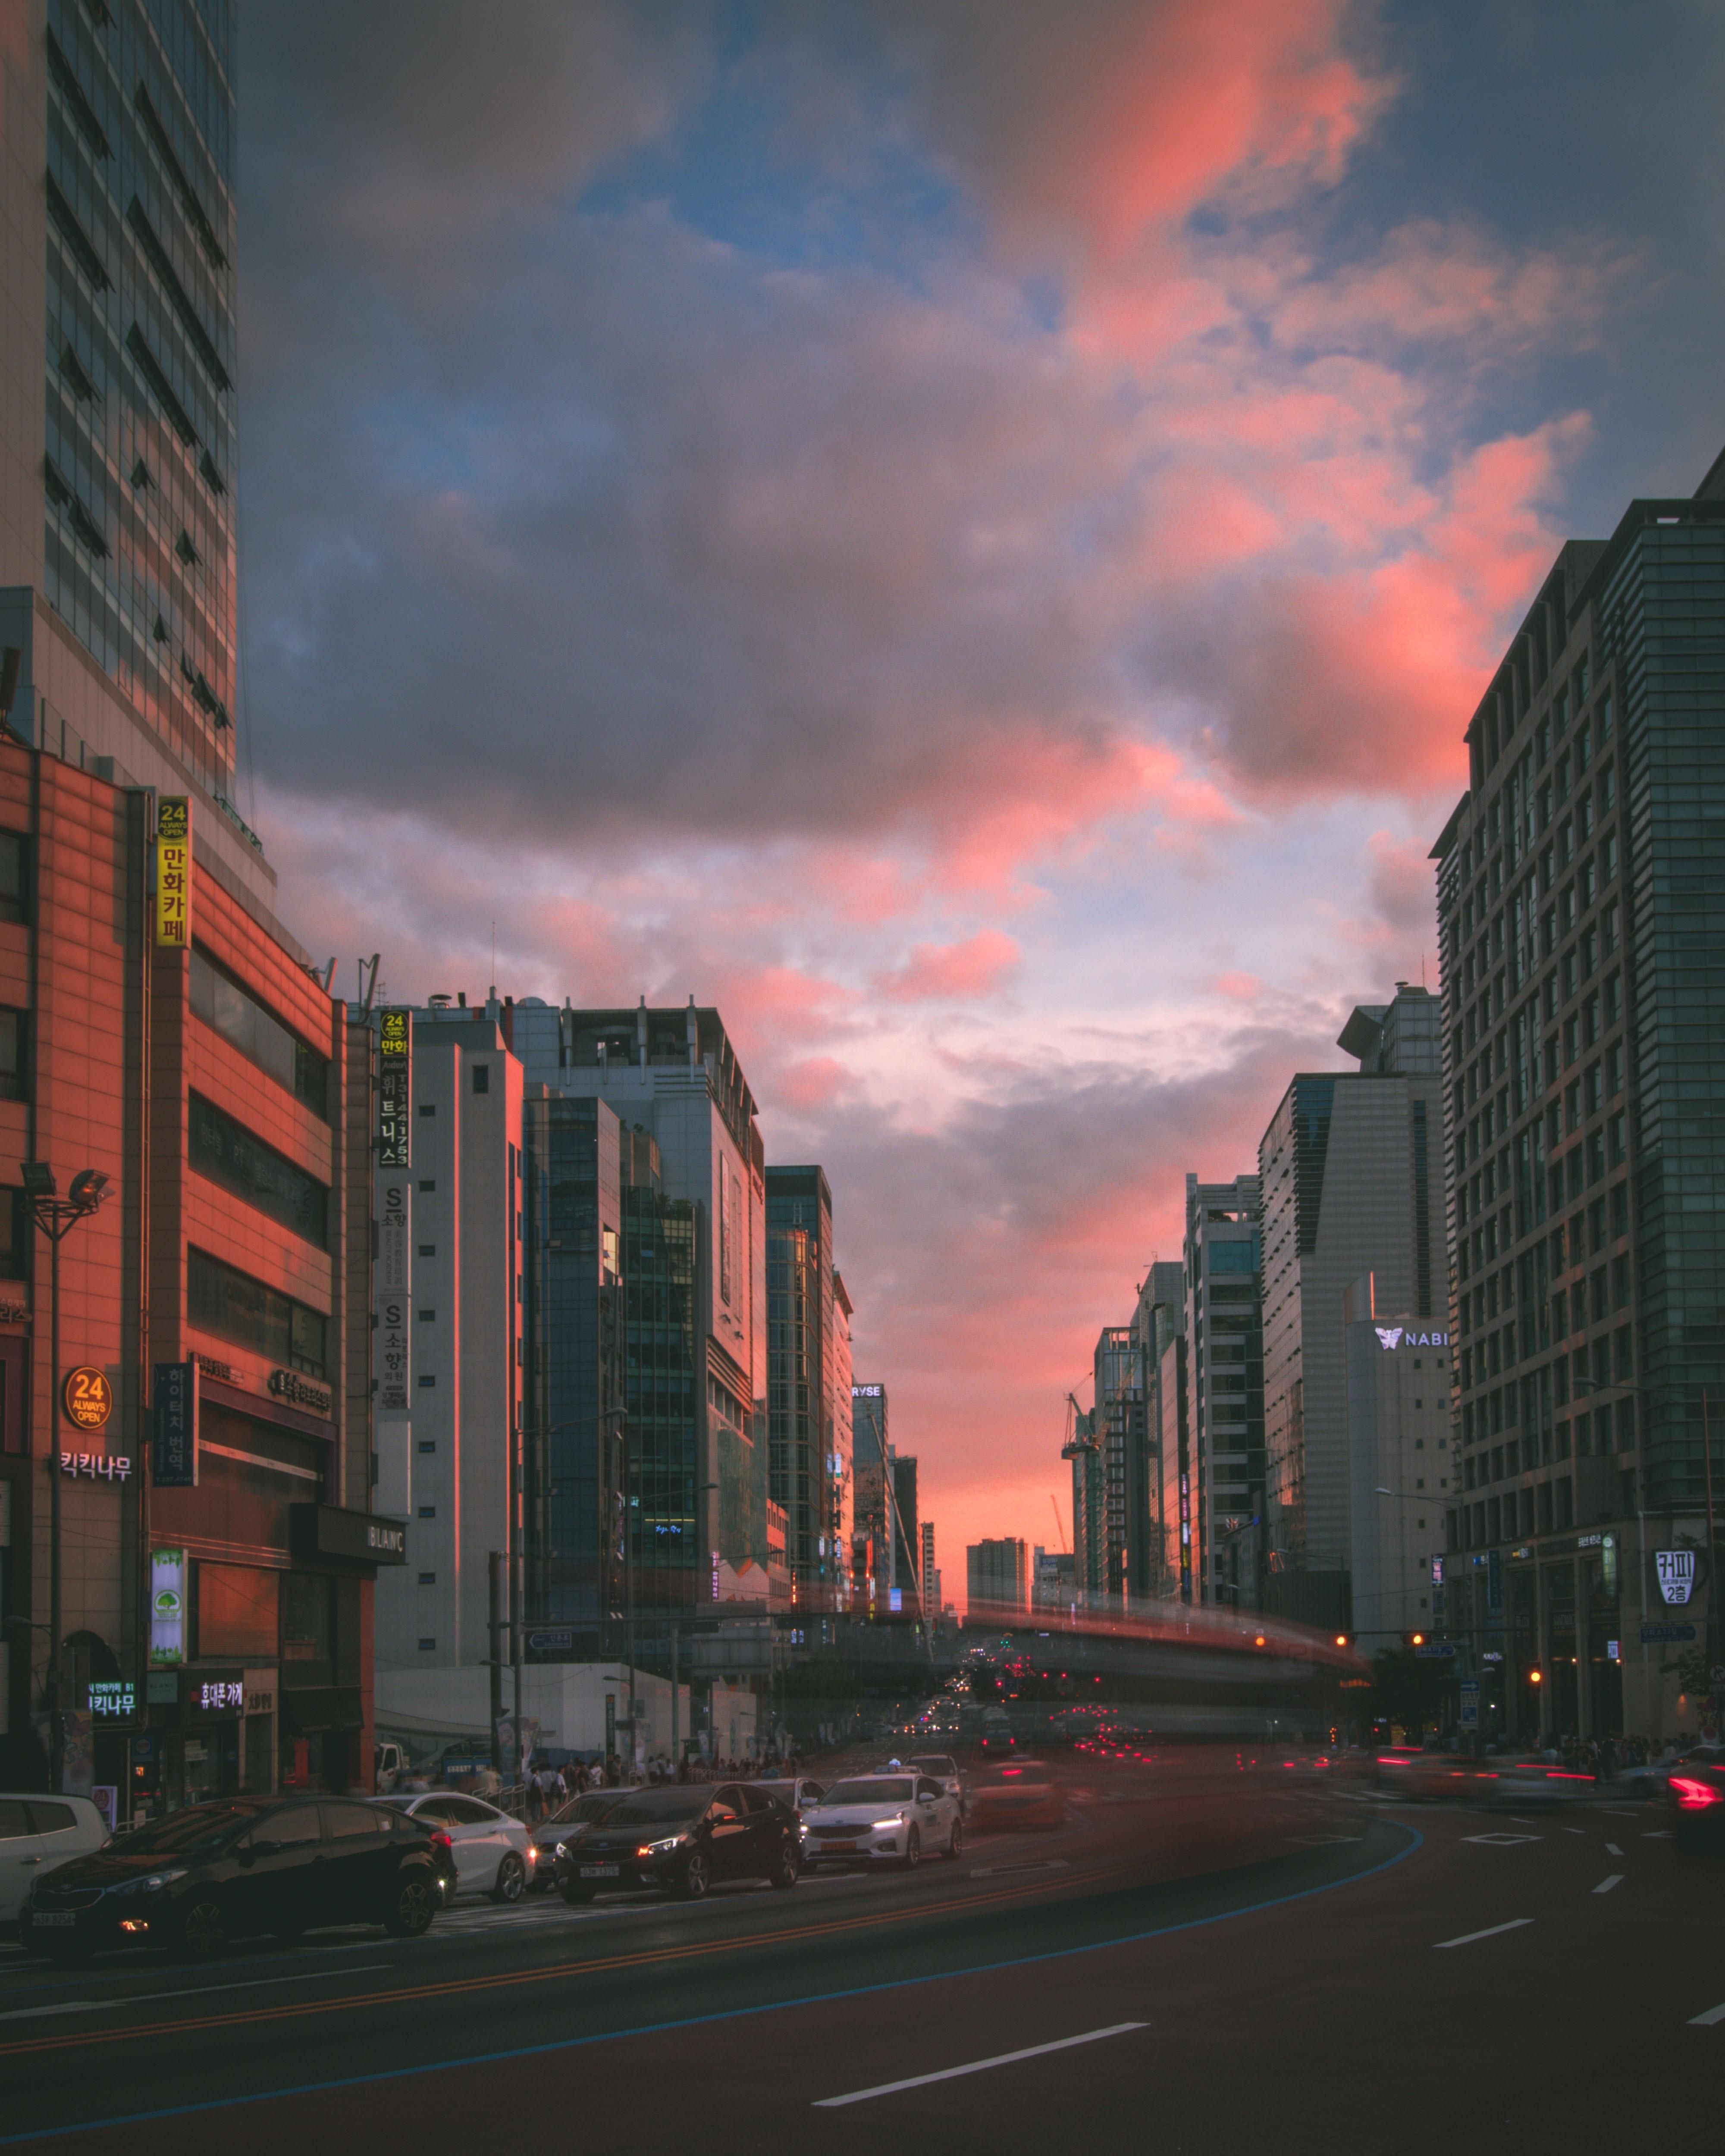 A city street with tall buildings and a pink sky. - Seoul